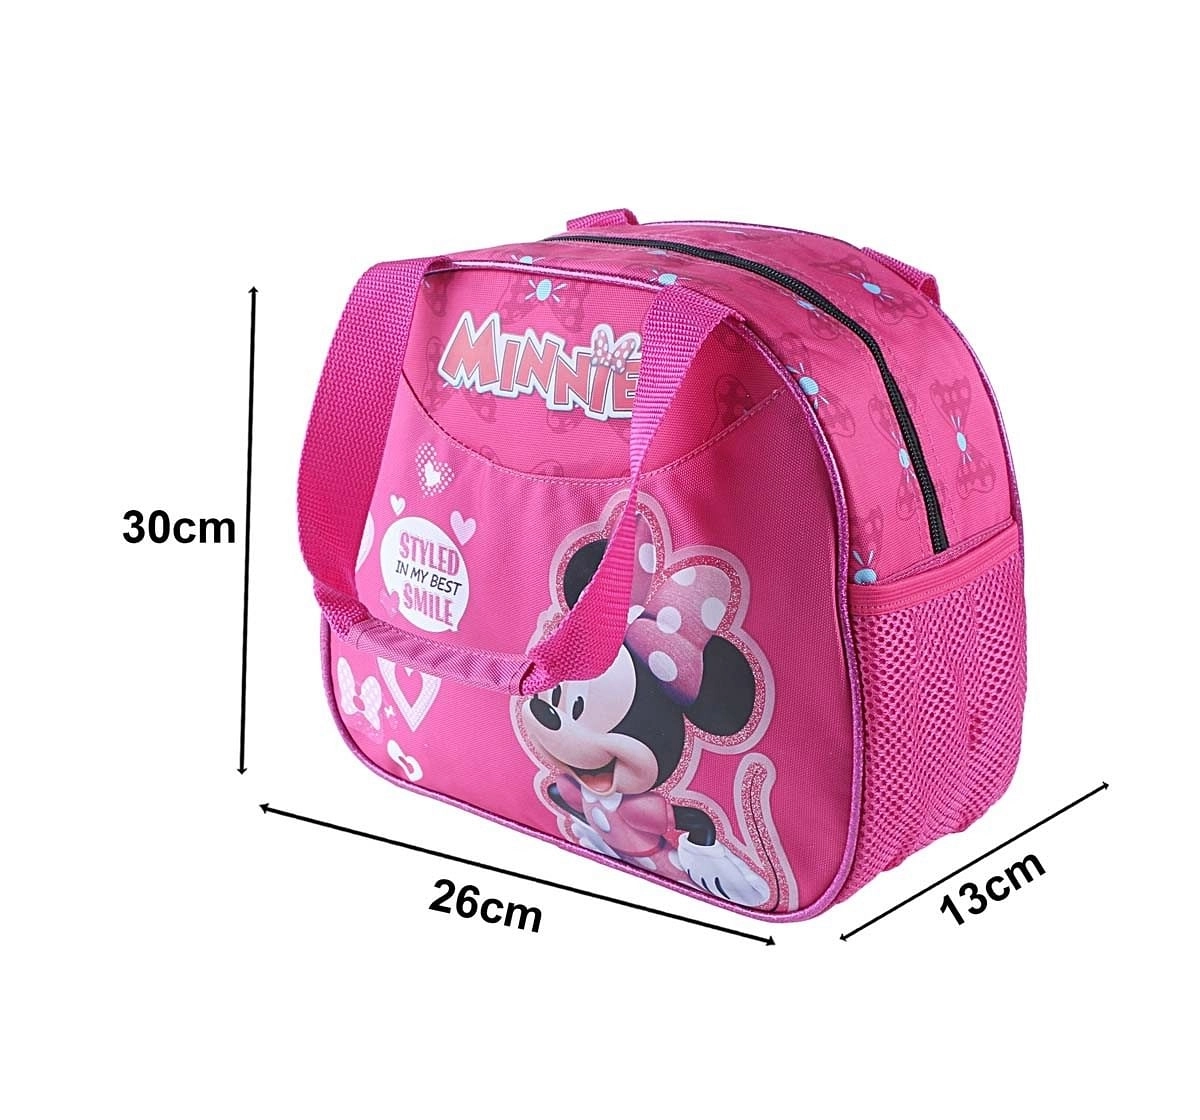 Disney Minnie - Pink Trave Bags for age 3Y+